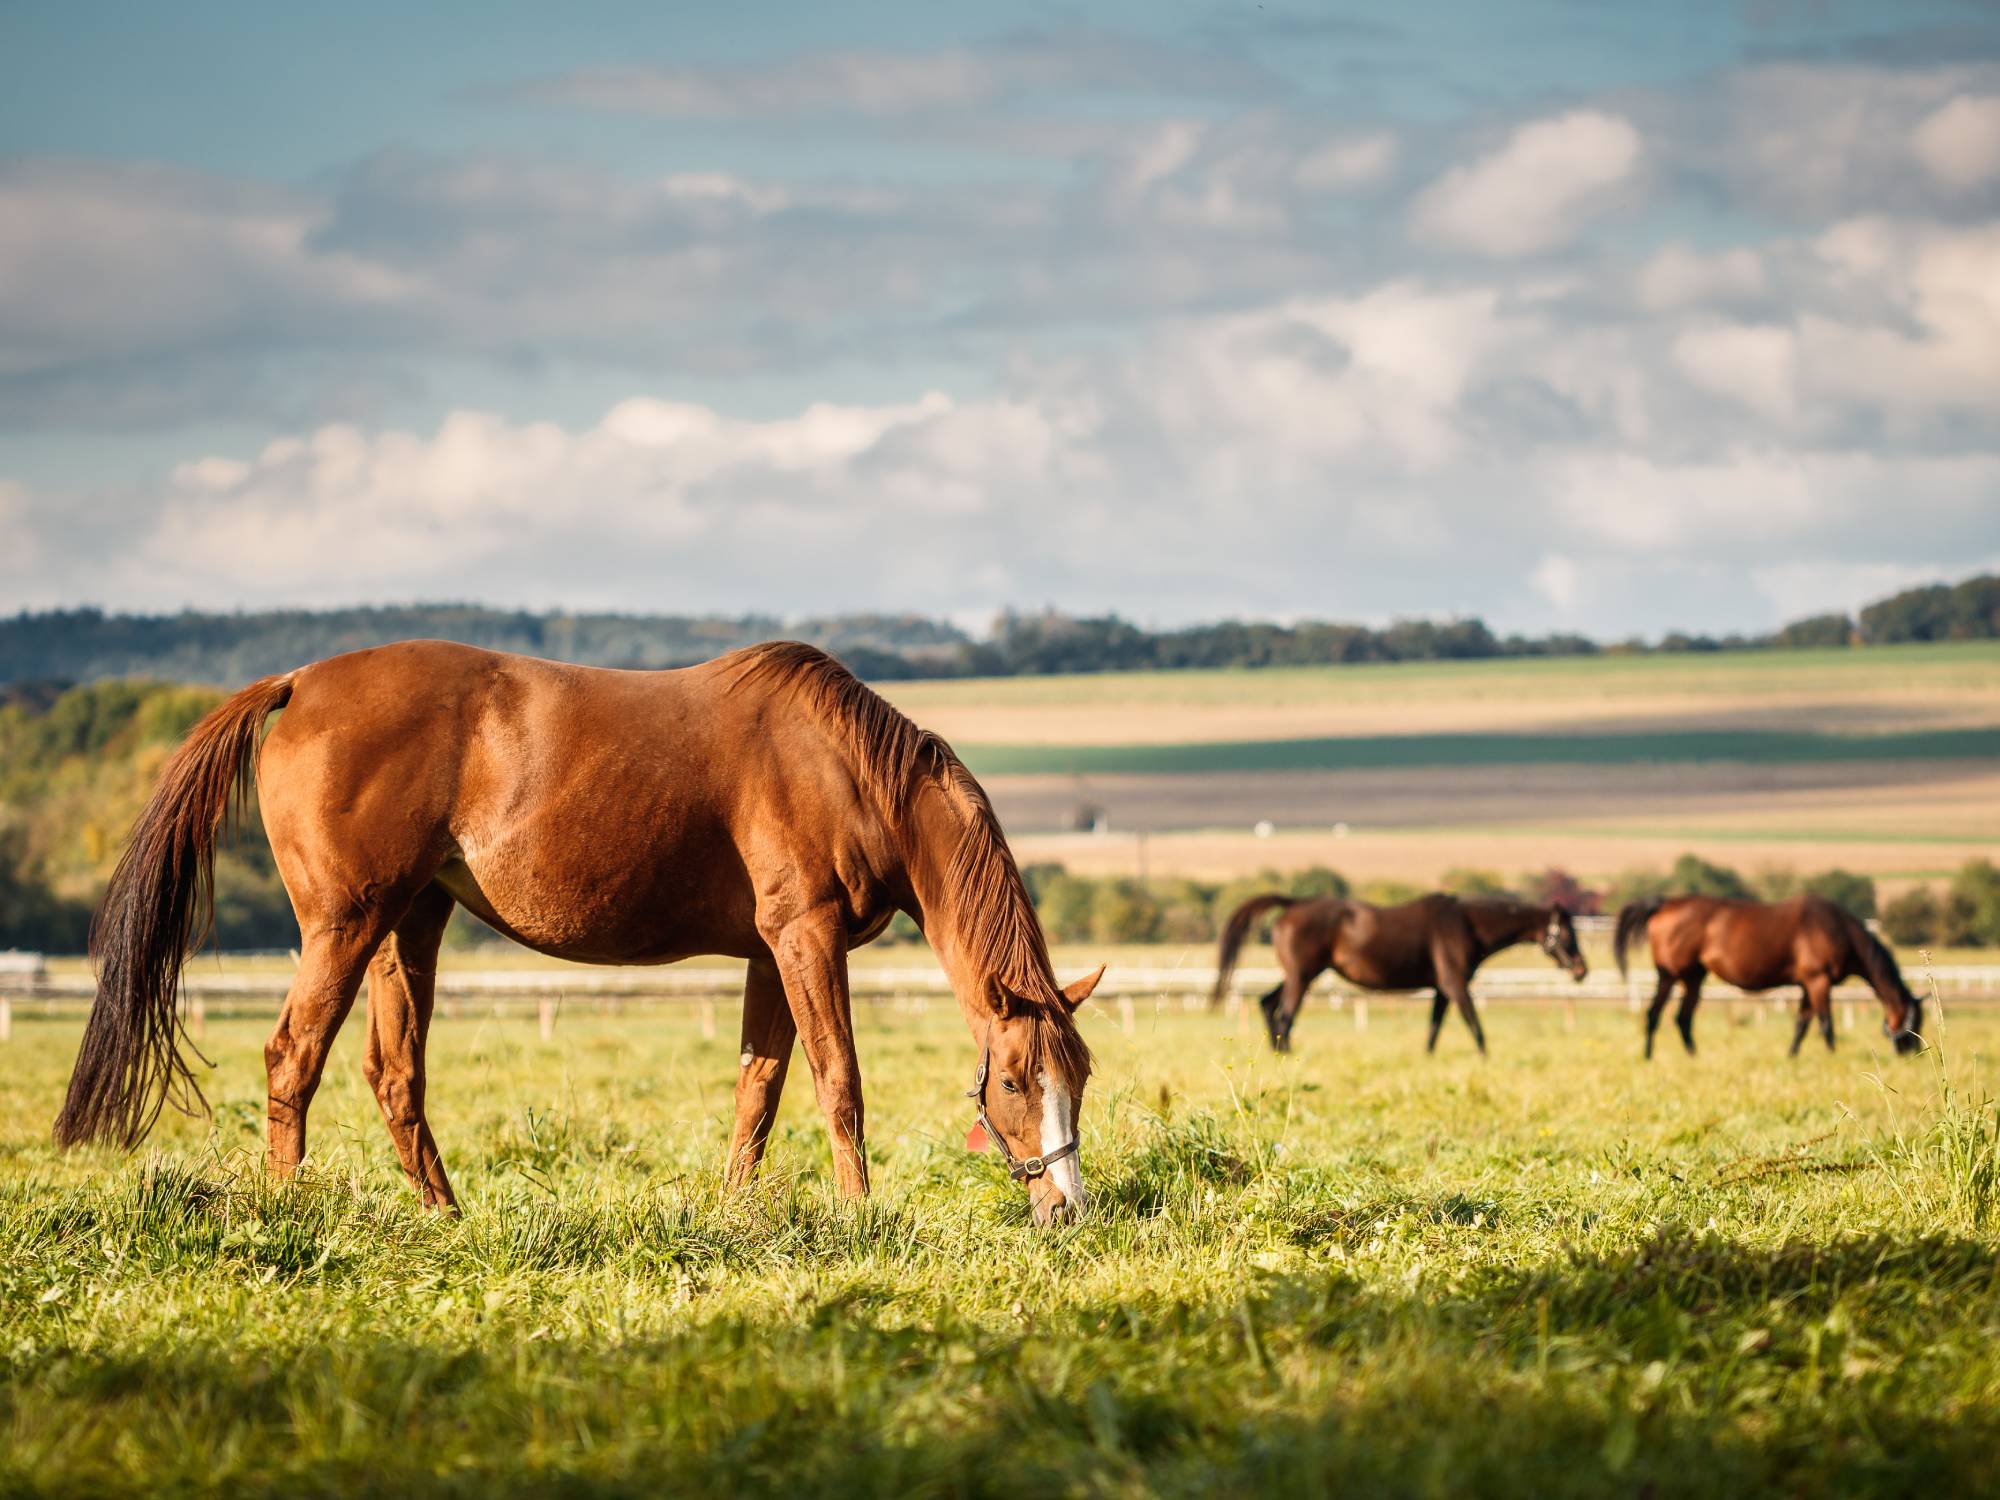 Chestnut and bay horses grazing on tall, green grass in a pasture with rolling hills surrounded by a white fence.